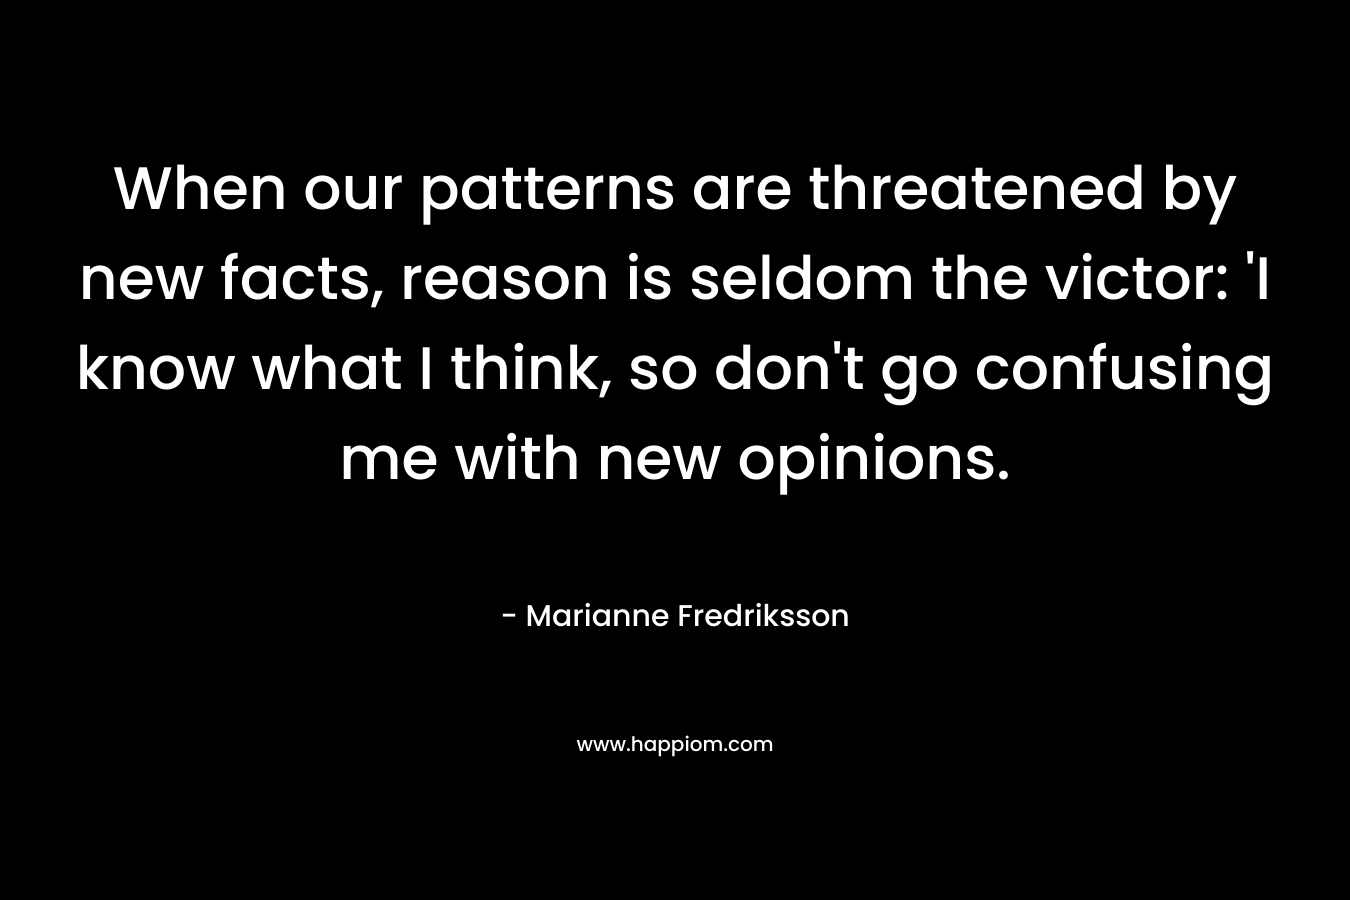 When our patterns are threatened by new facts, reason is seldom the victor: ‘I know what I think, so don’t go confusing me with new opinions. – Marianne Fredriksson